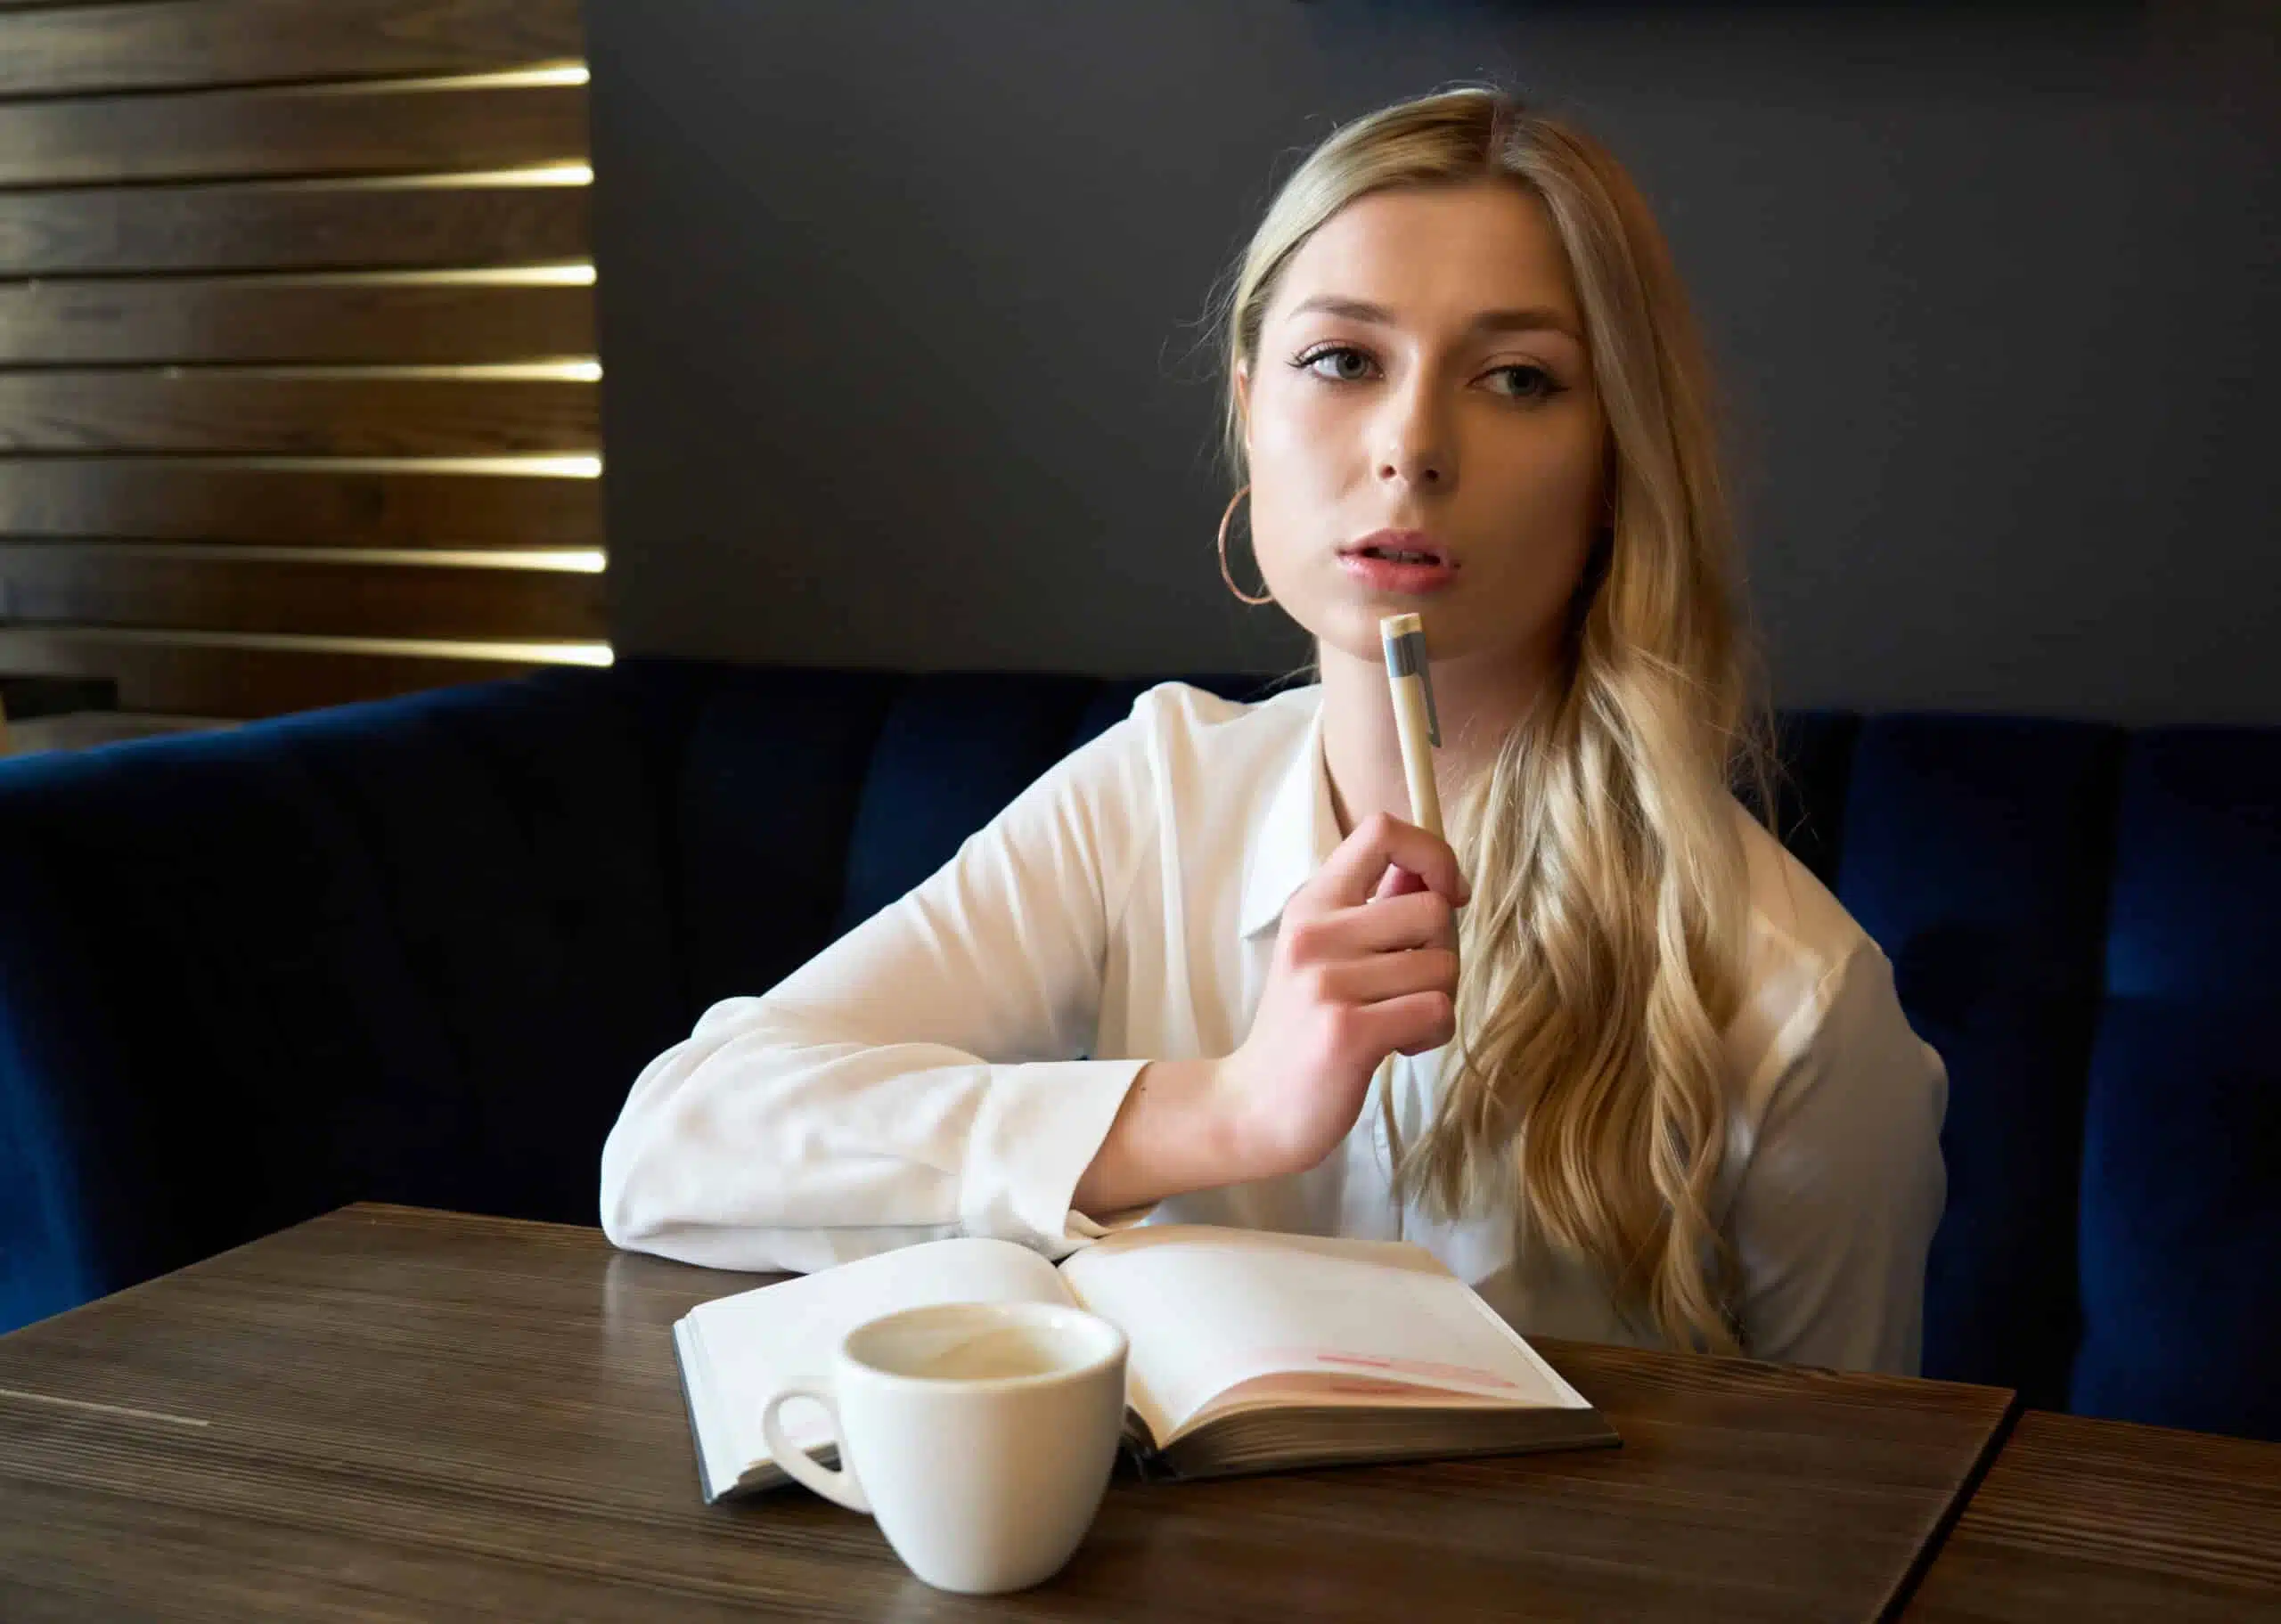 pretty blonde woman thinking, writing in notebook, mug with drink on the table.